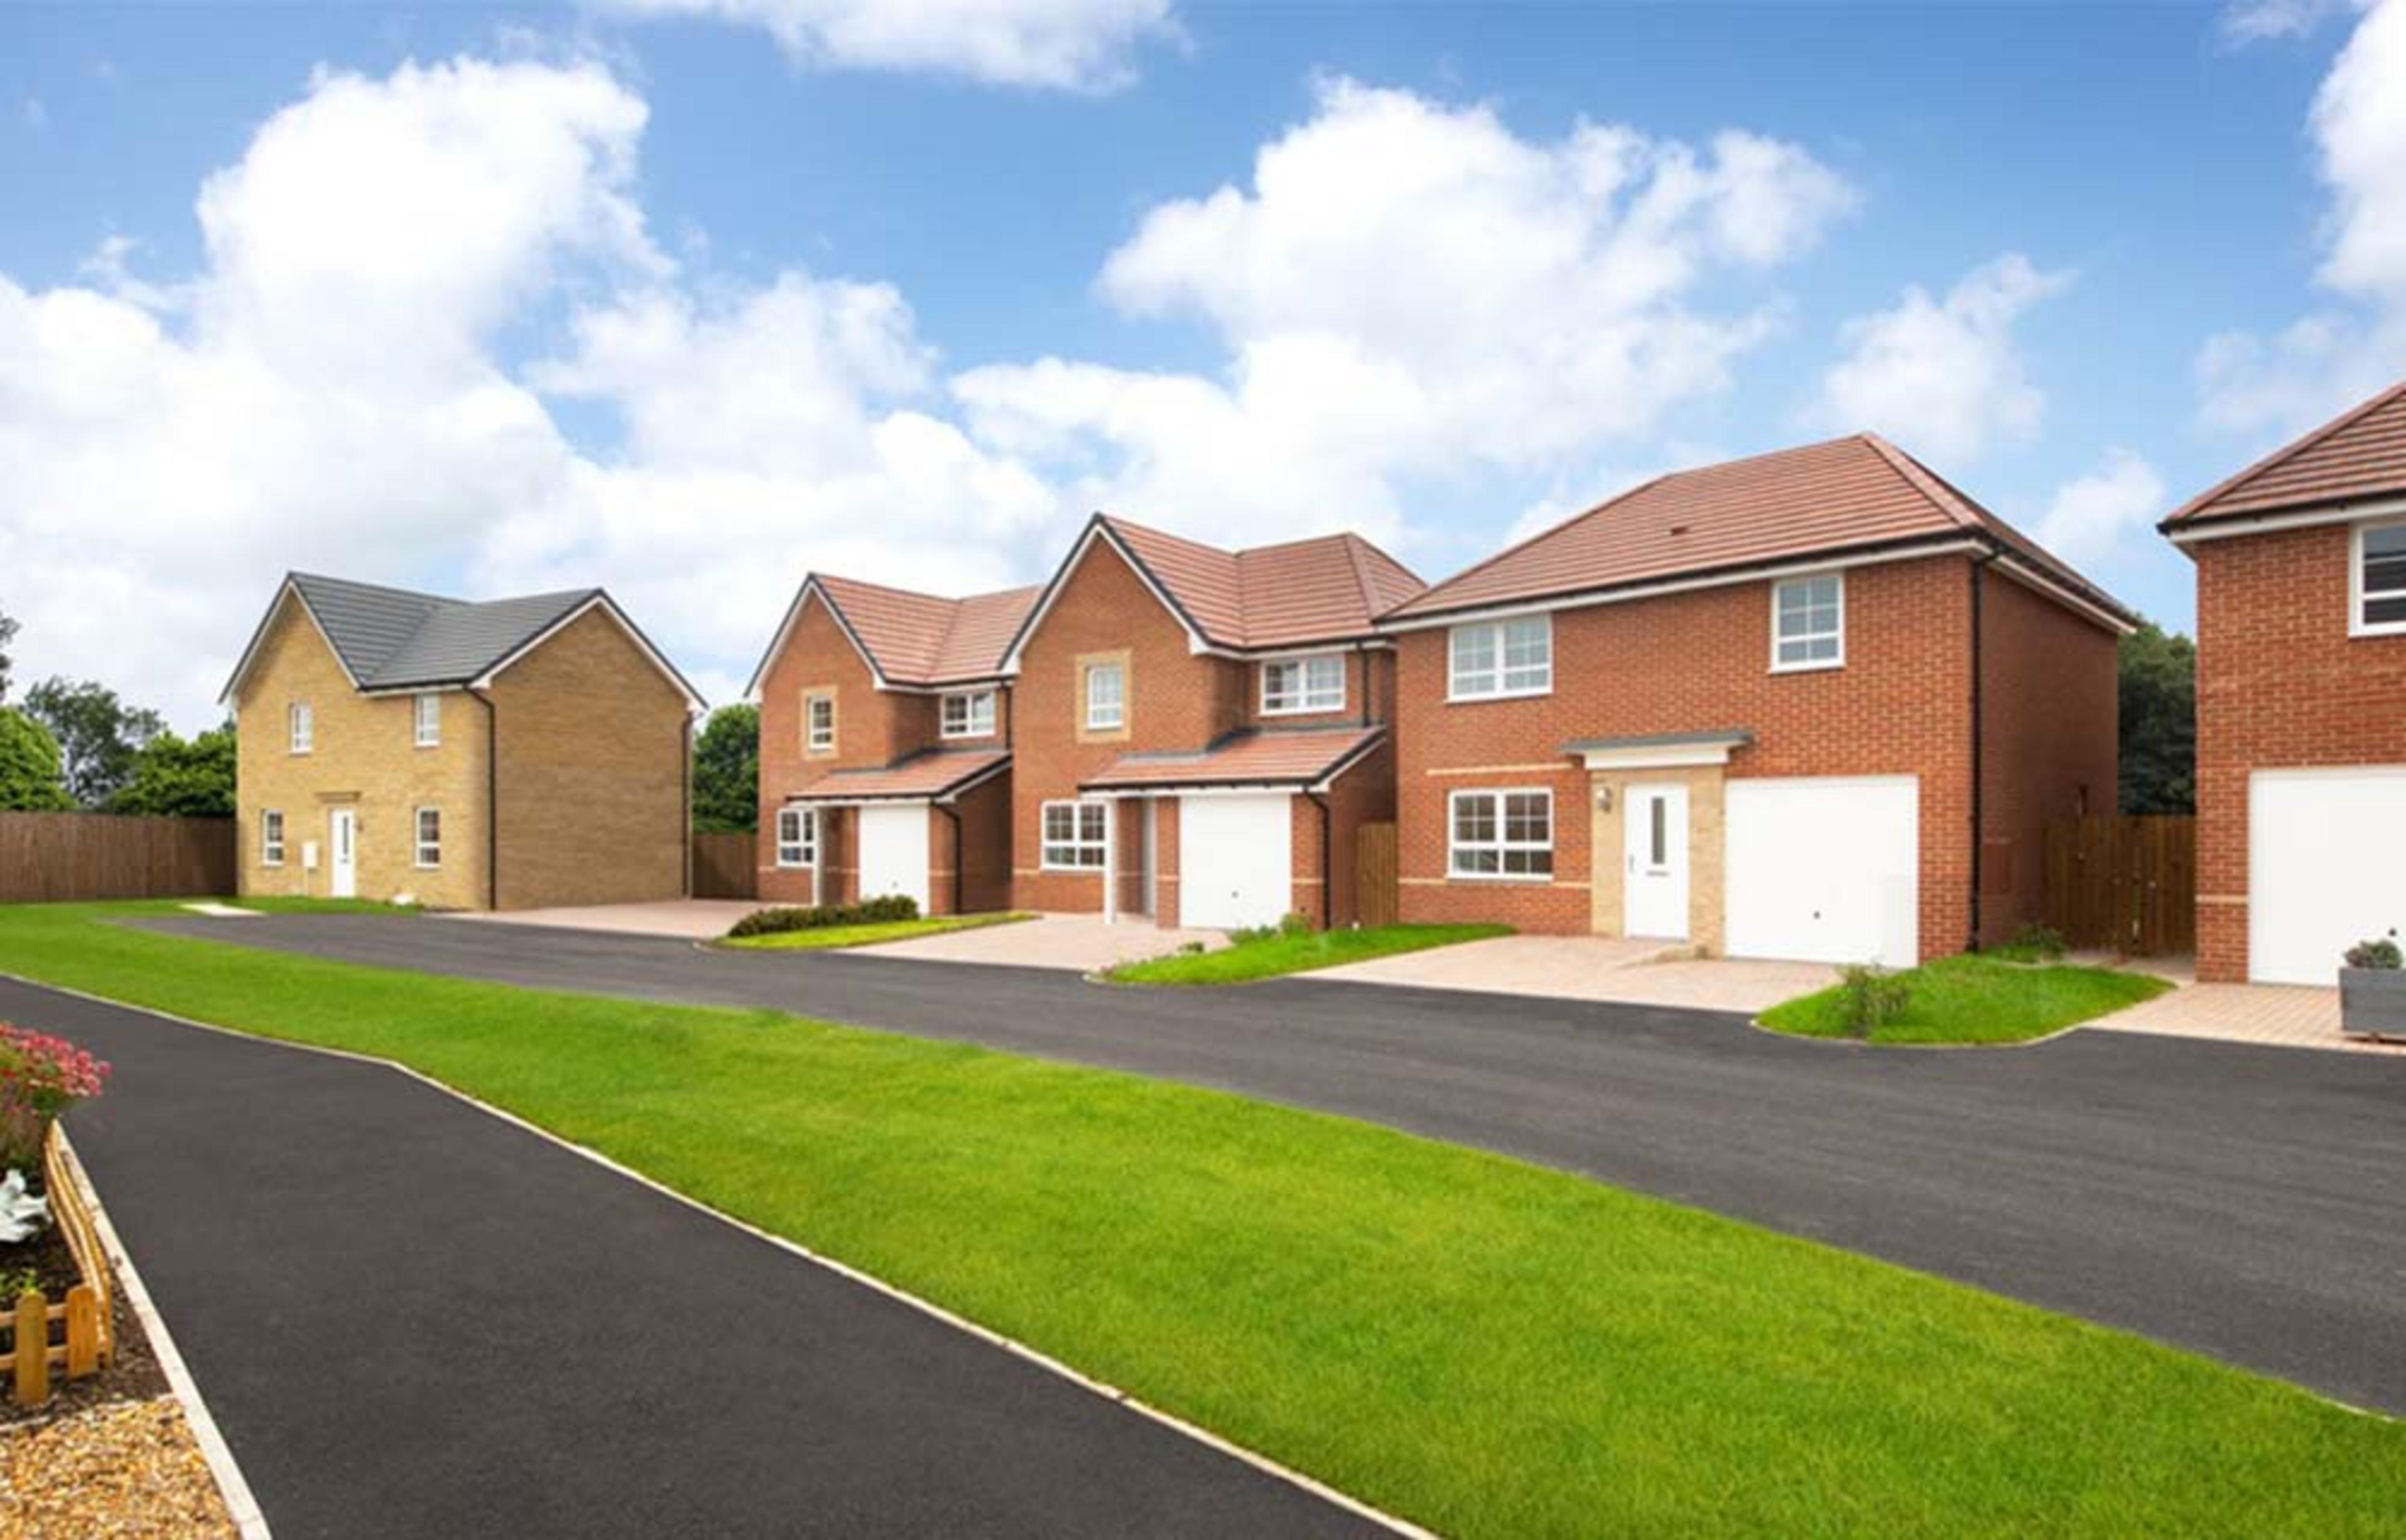 persona-homes-church-fields-homes-for-sale-new-hartley-cgi-street-view-4